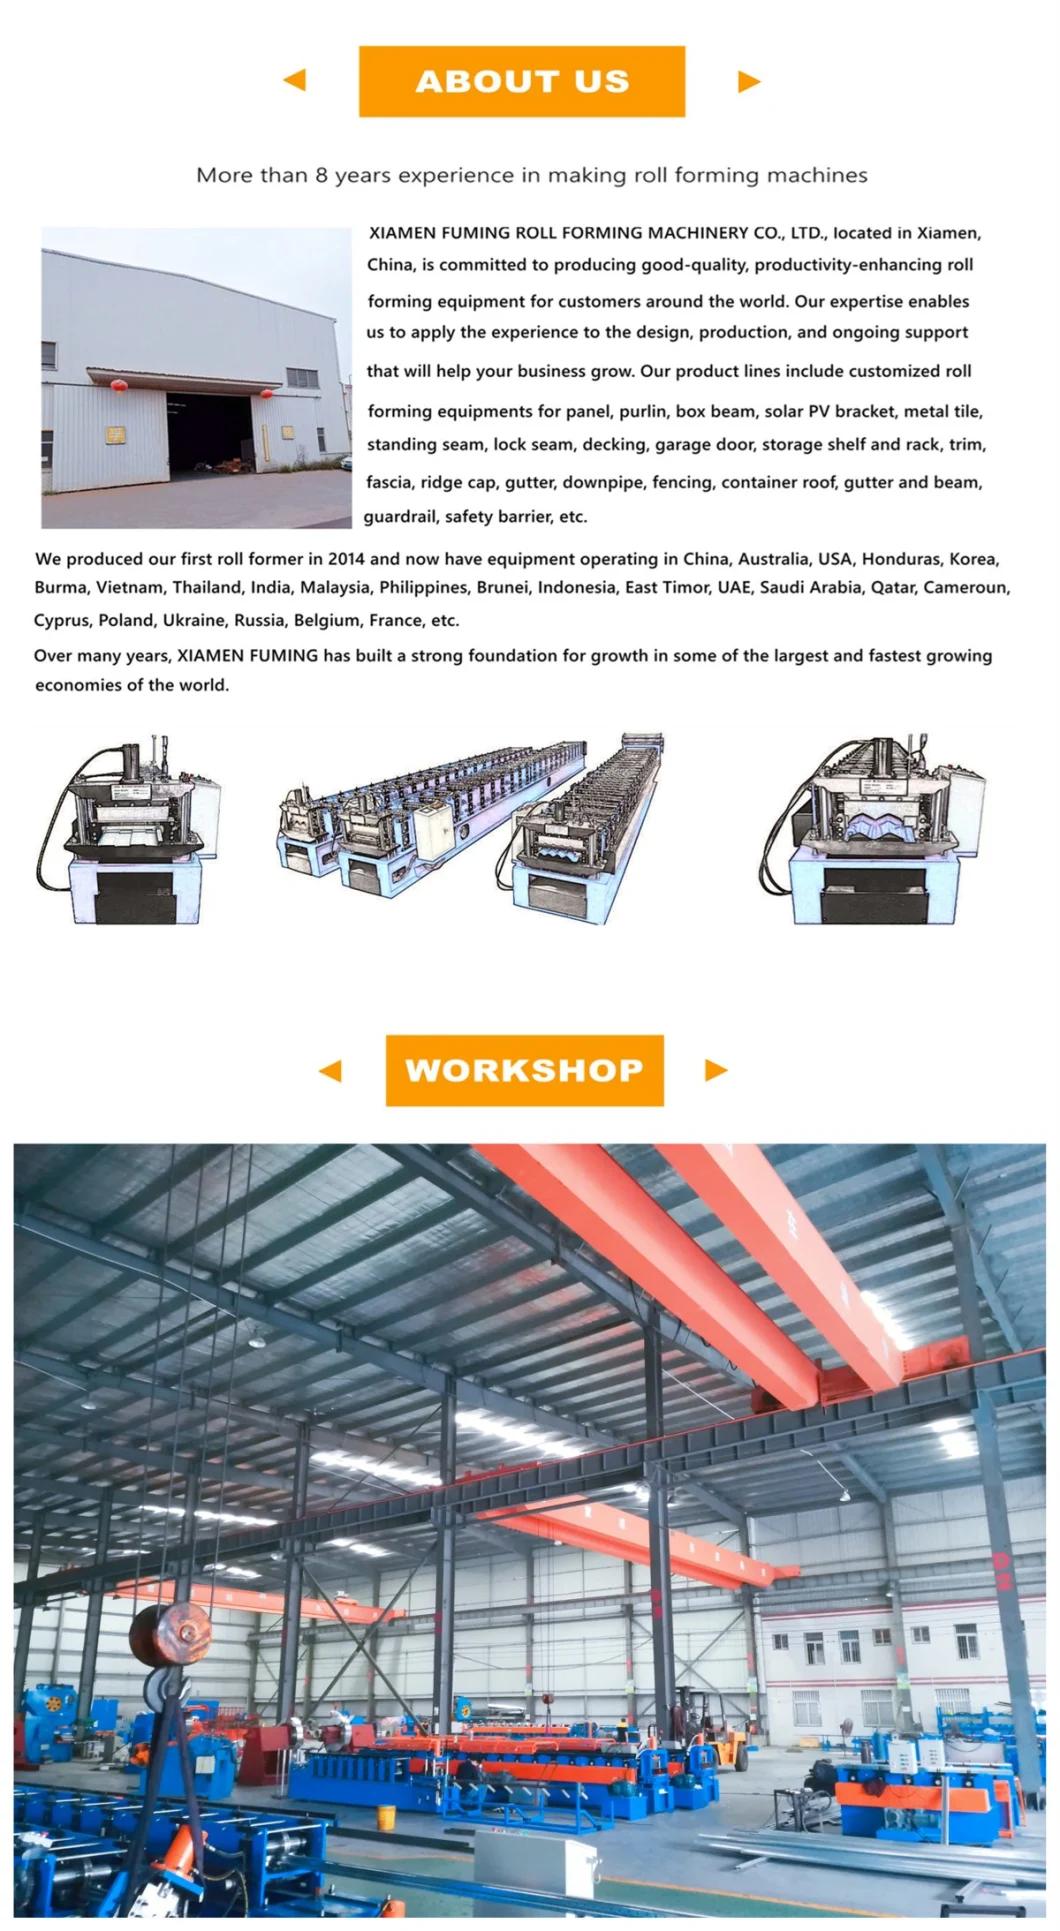 Roof 12 Months Fuming Roll Forming Machinery Tile Making Machine